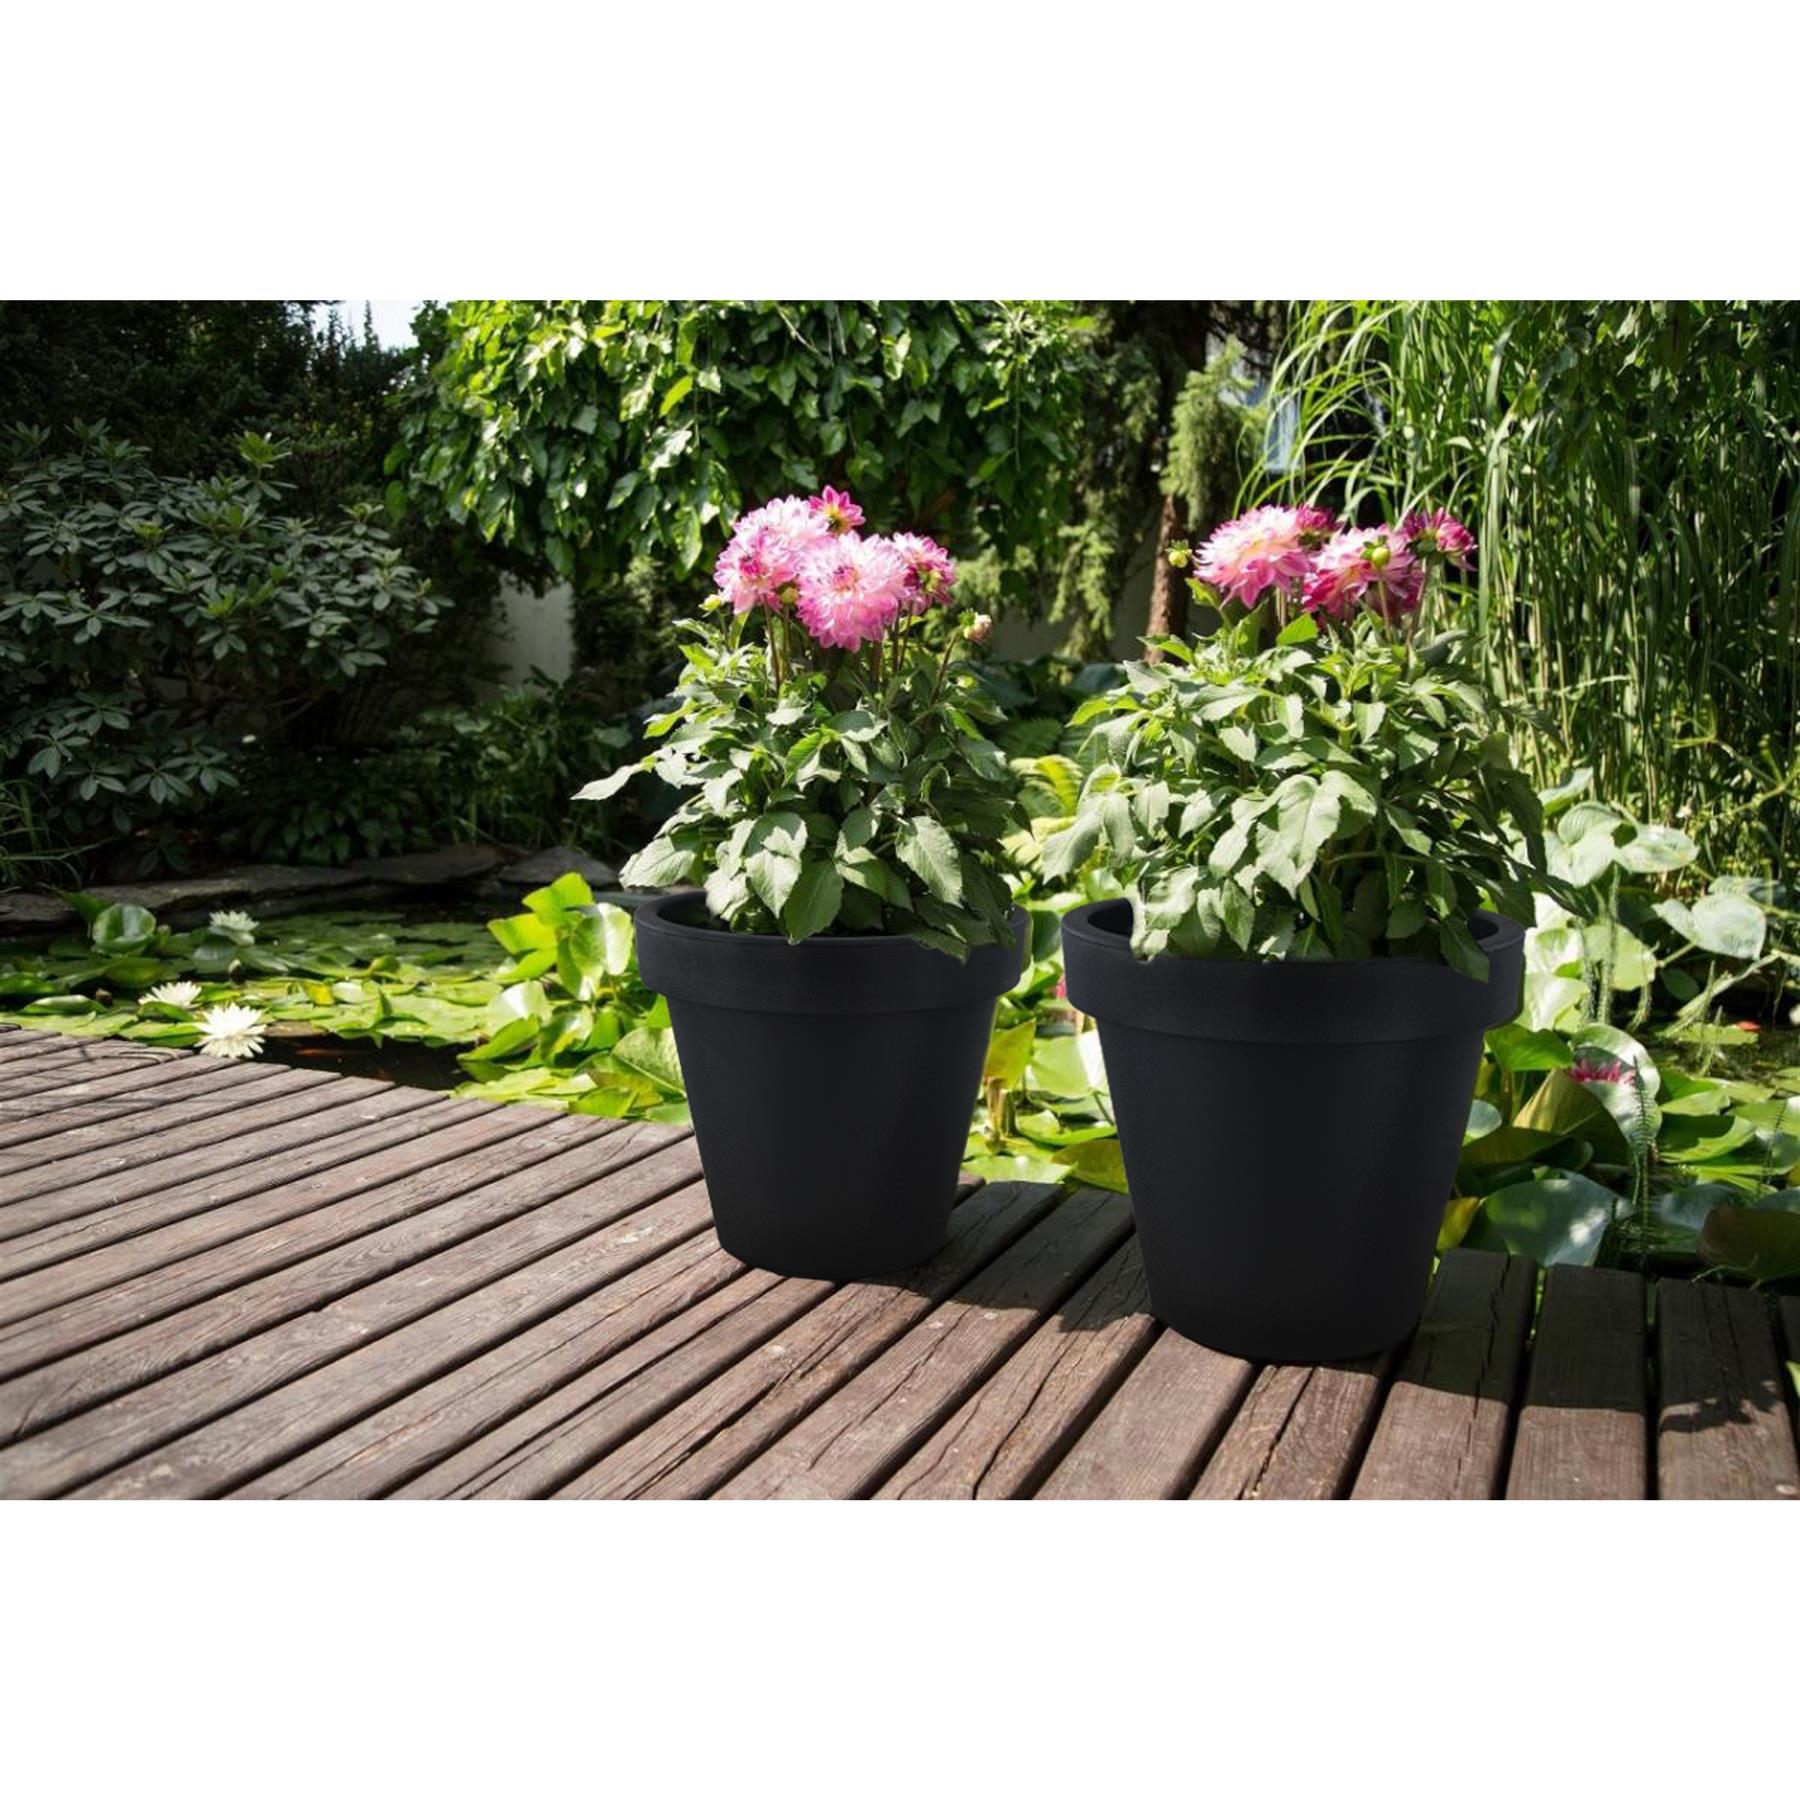 Anthracite Large Flower Pot Planter 35 x 31 cm by Geezy - UKBuyZone